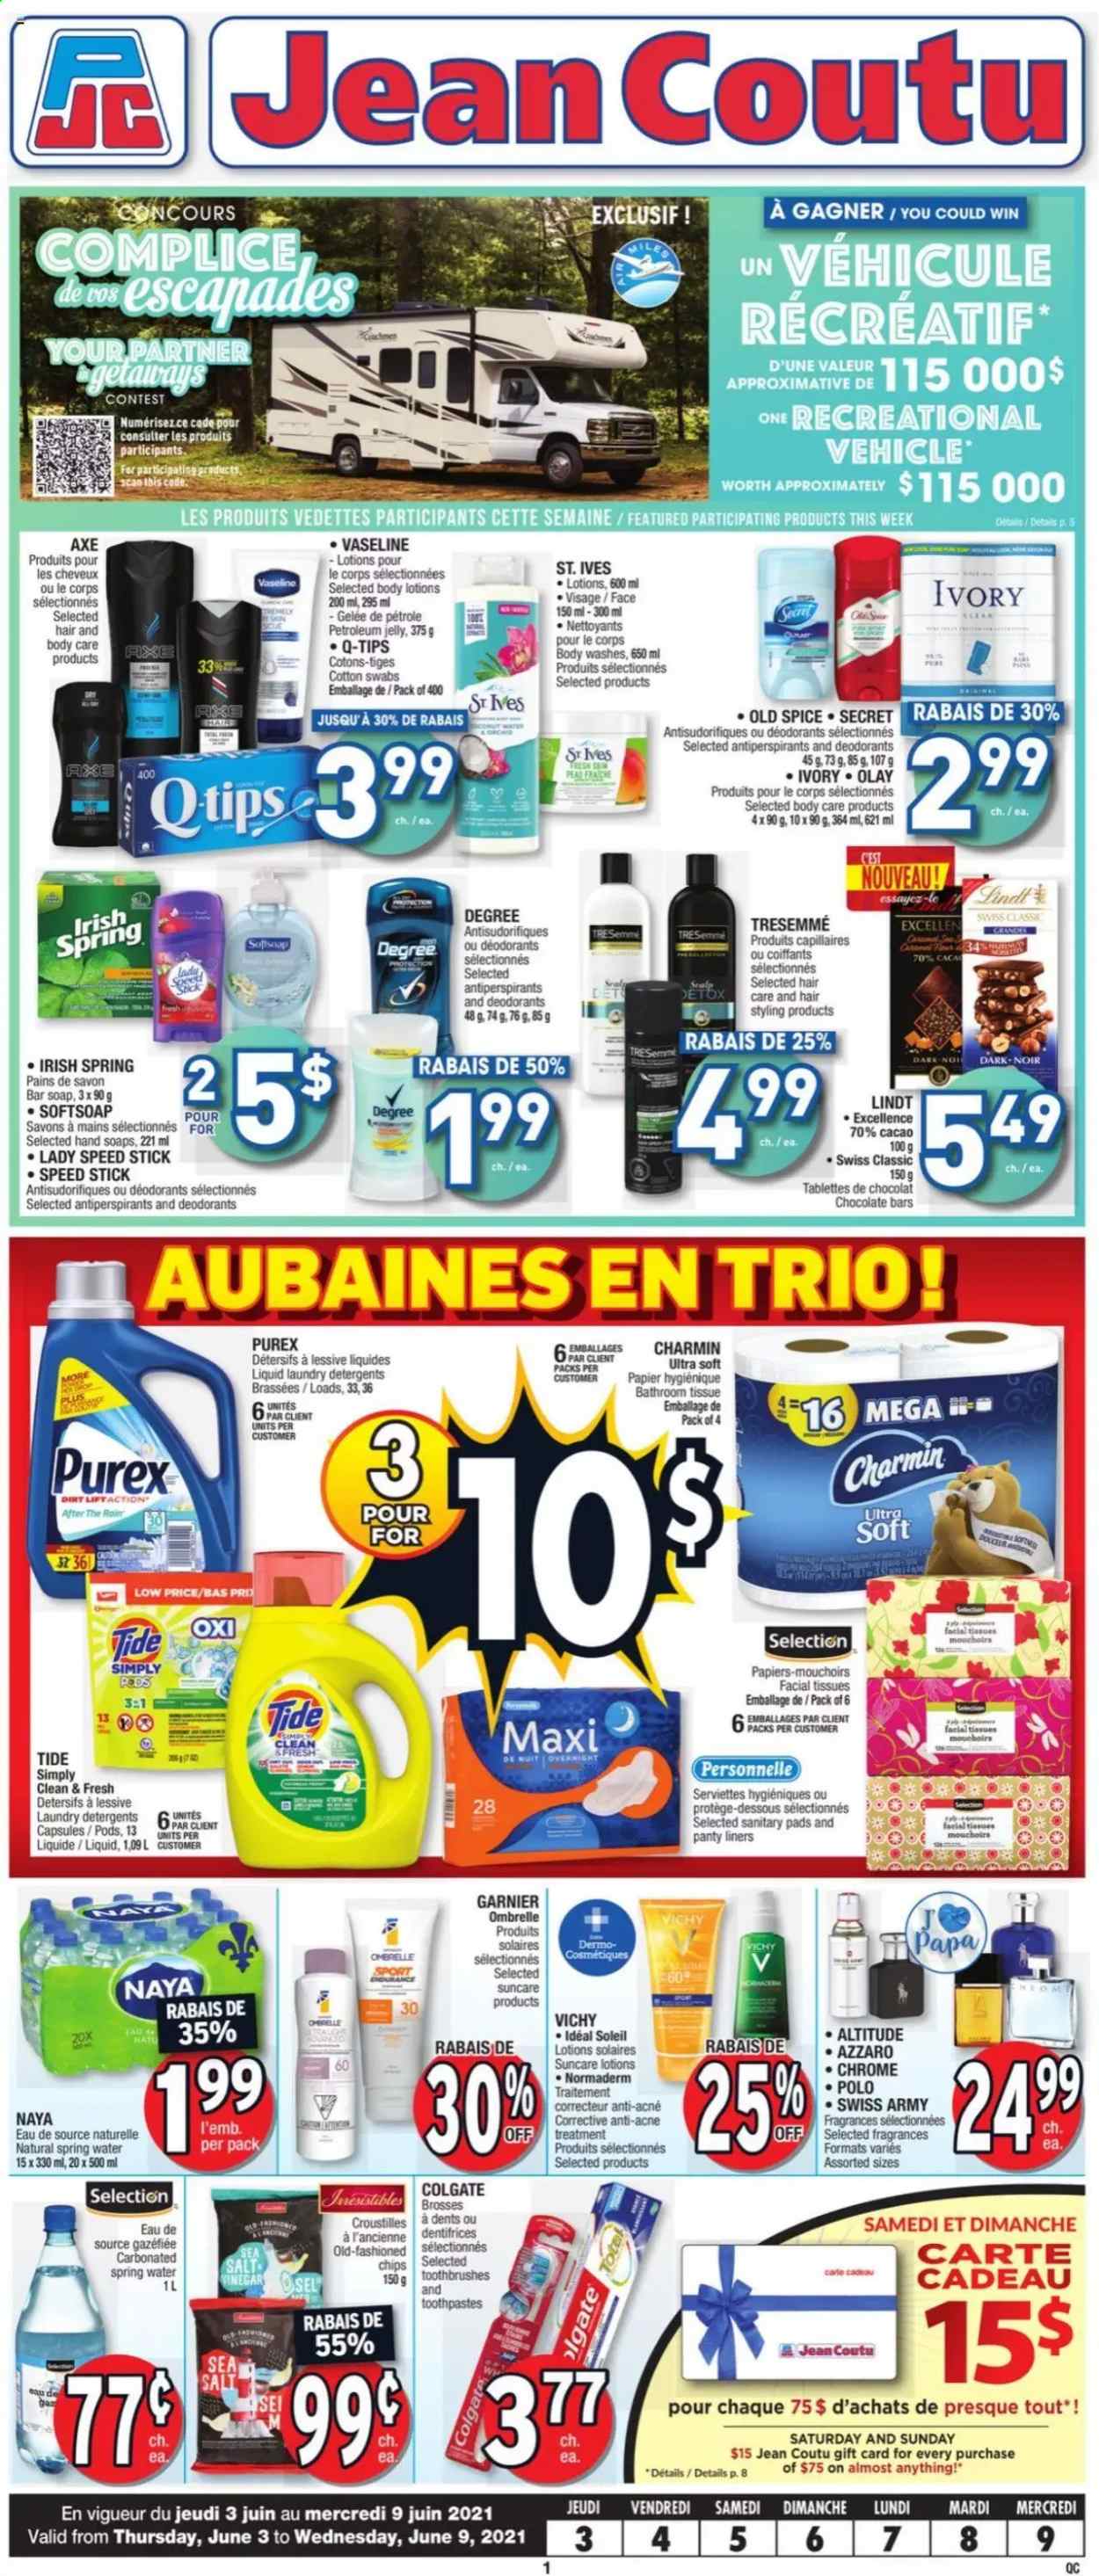 thumbnail - Jean Coutu Flyer - June 03, 2021 - June 09, 2021 - Sales products - chocolate bar, spice, spring water, petroleum jelly, bath tissue, Charmin, Tide, Purex, Softsoap, Vichy, Vaseline, soap bar, soap, sanitary pads, facial tissues, Olay, TRESemmé, Speed Stick, vehicle, Garnier, Old Spice, chips, deodorant. Page 1.